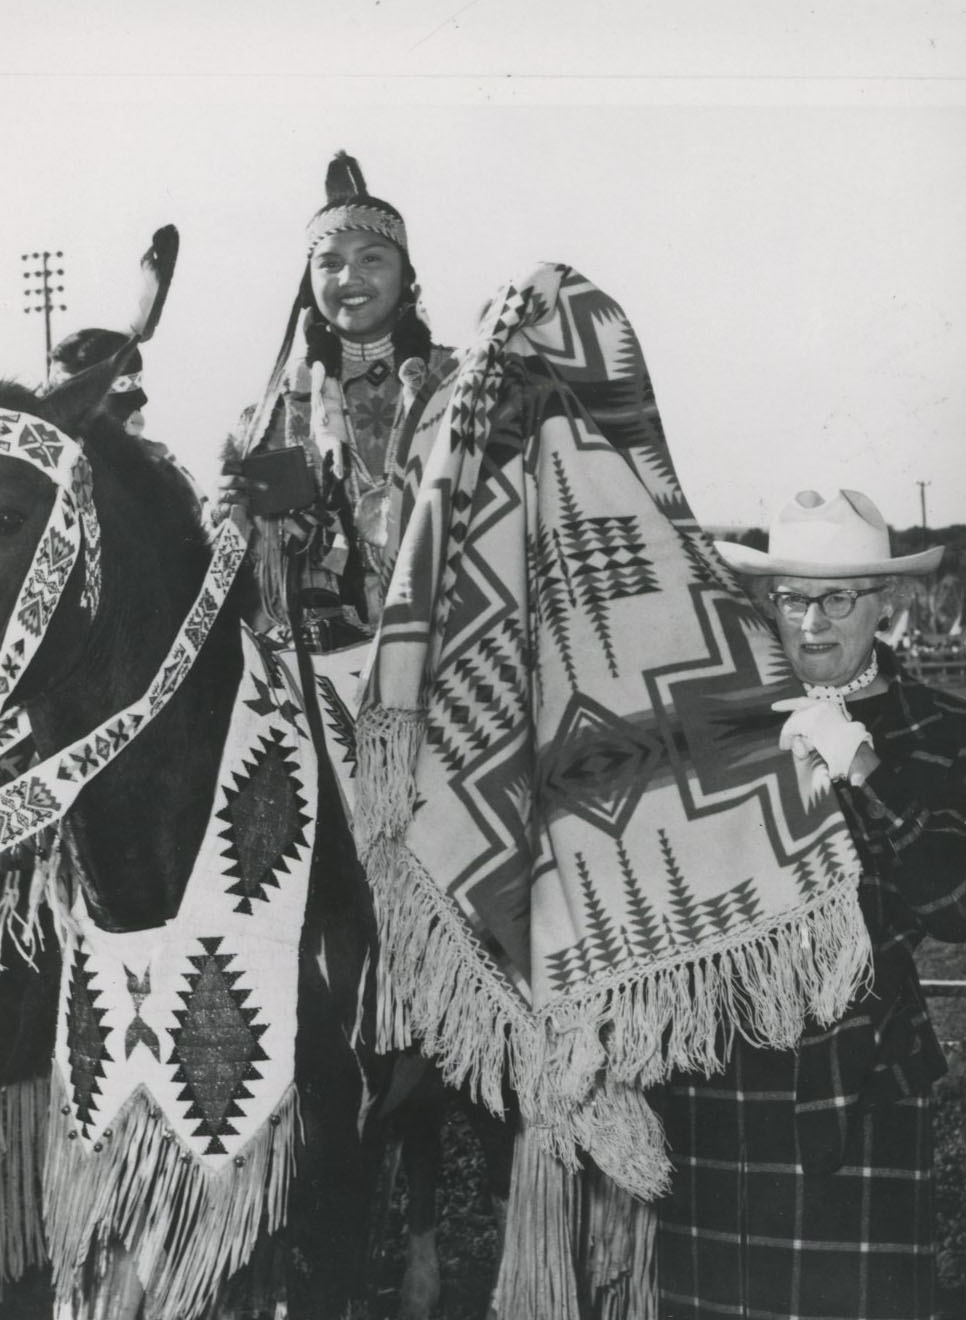 Jean Fell presents the blanket during the American Beauty Contest awards ceremony in Pendleton.